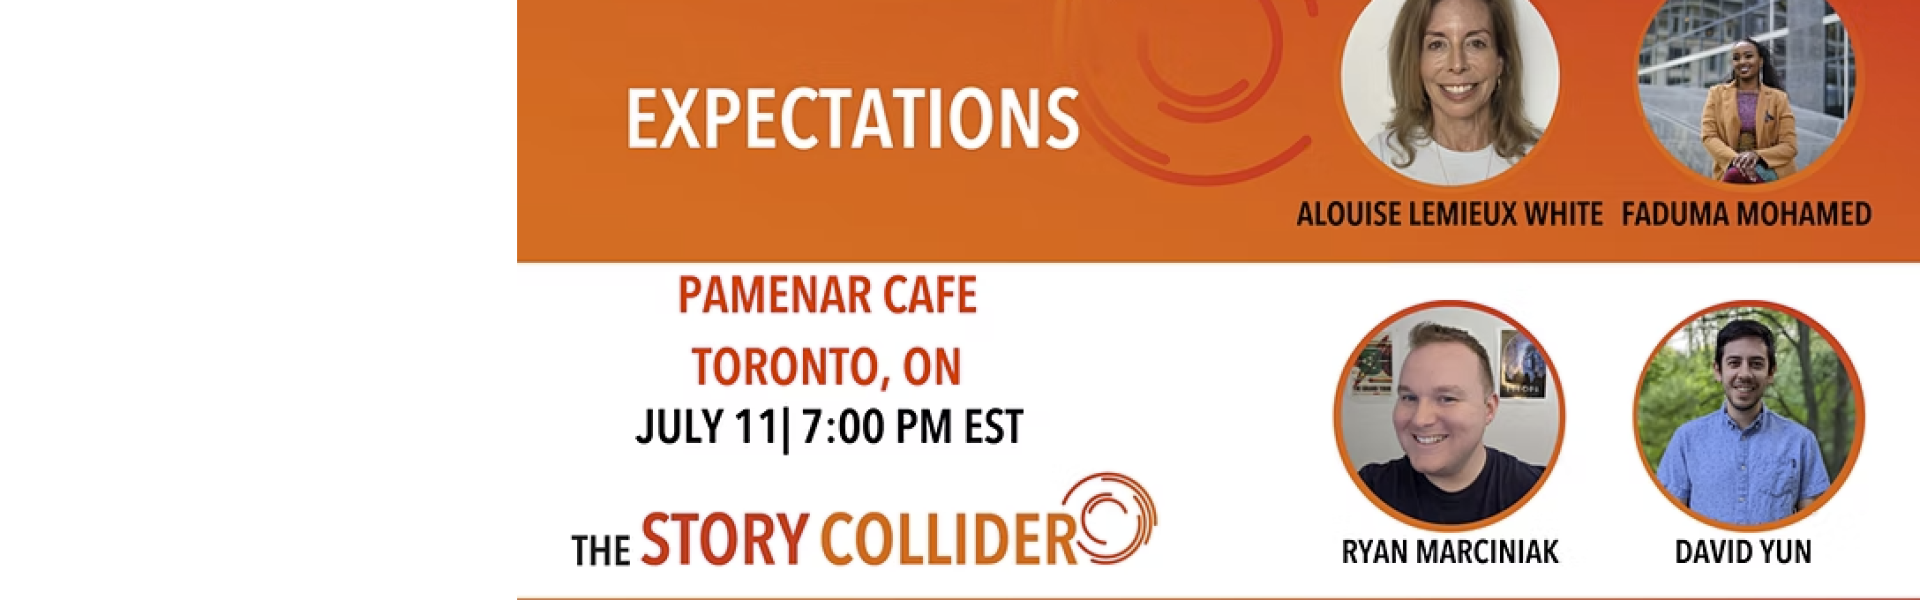 Story Collider - Expectations